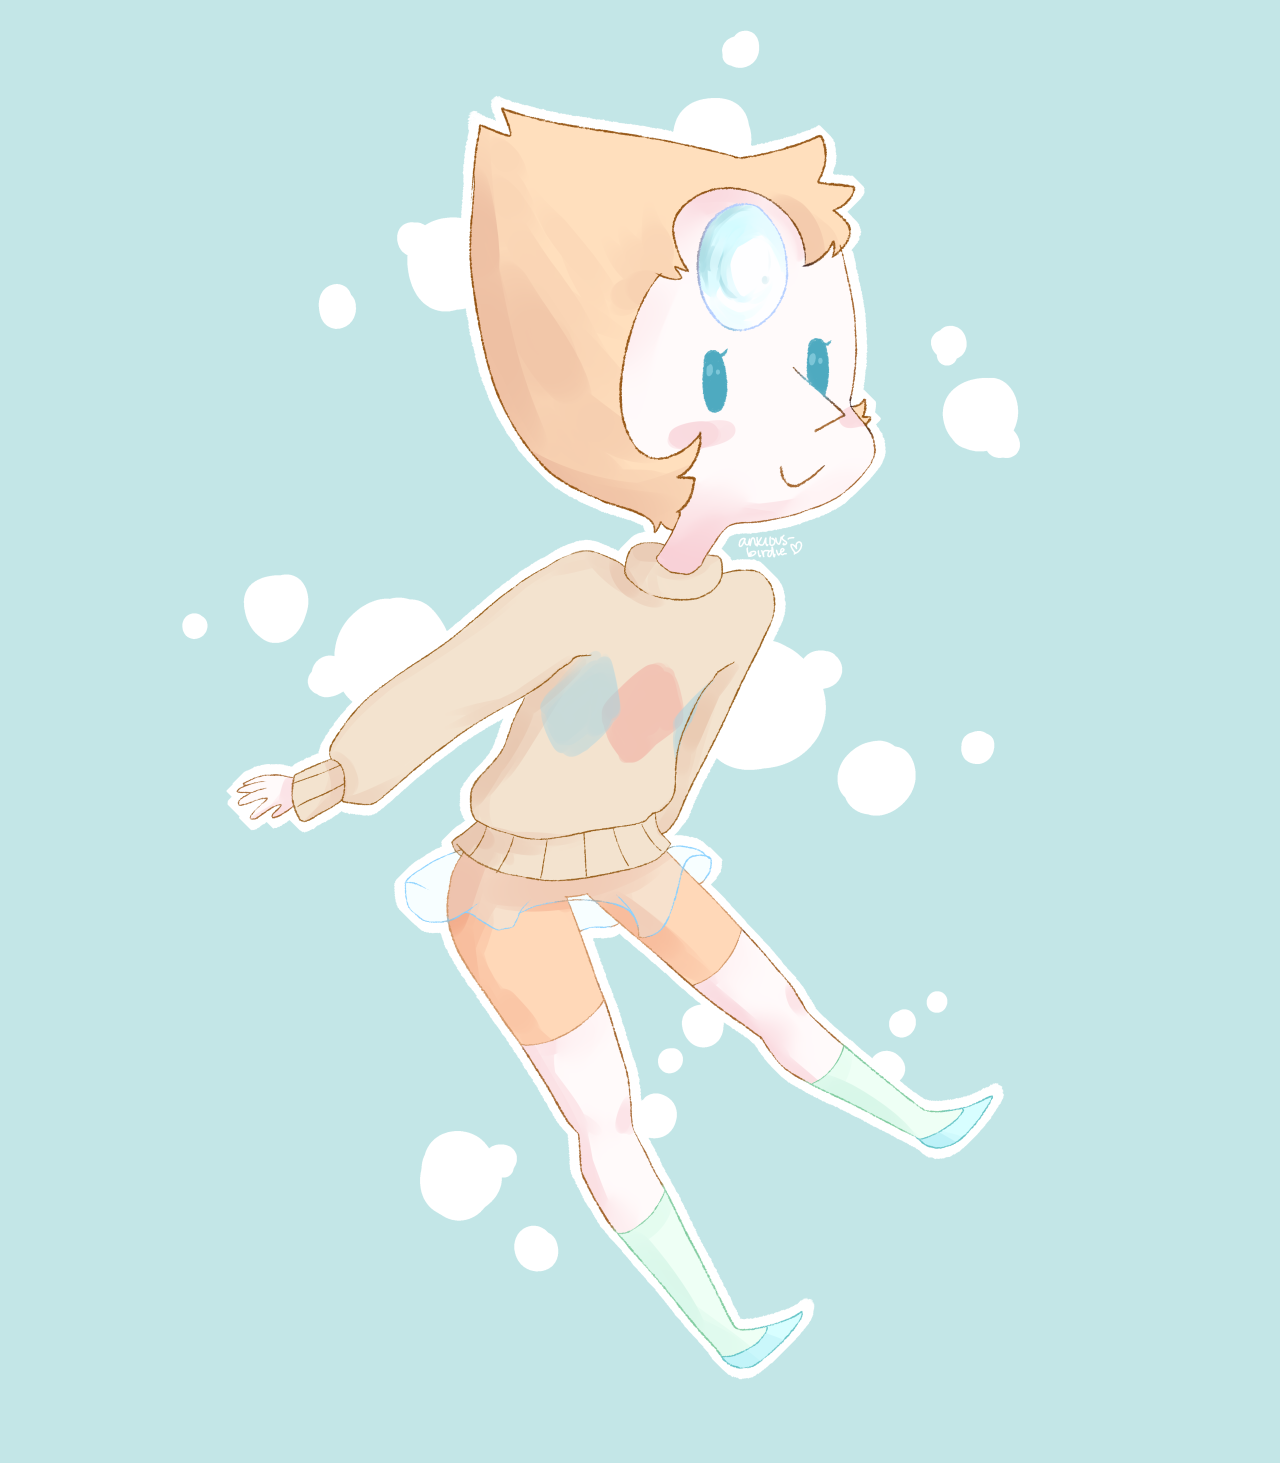 anxious-birdie:  I did a little kinda bad doodle of Pearl in the sweater from “Maximum